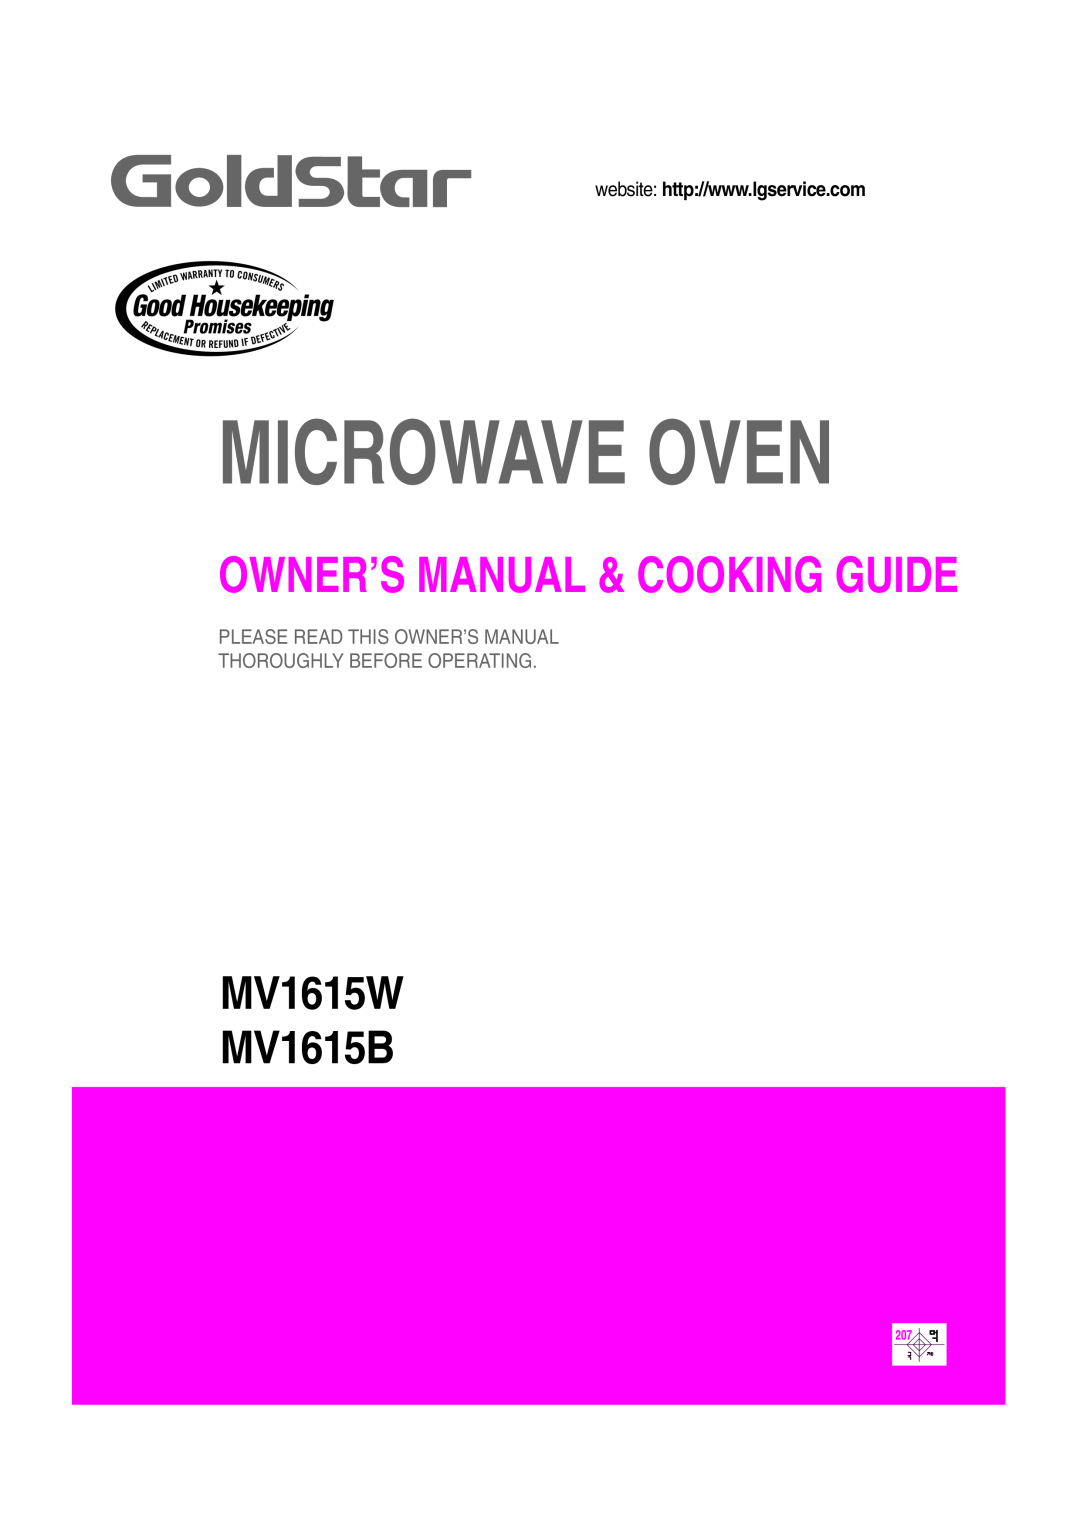 LG Electronics owner manual Microwave Oven, MV1615W MV1615B, Owner’S Manual & Cooking Guide 